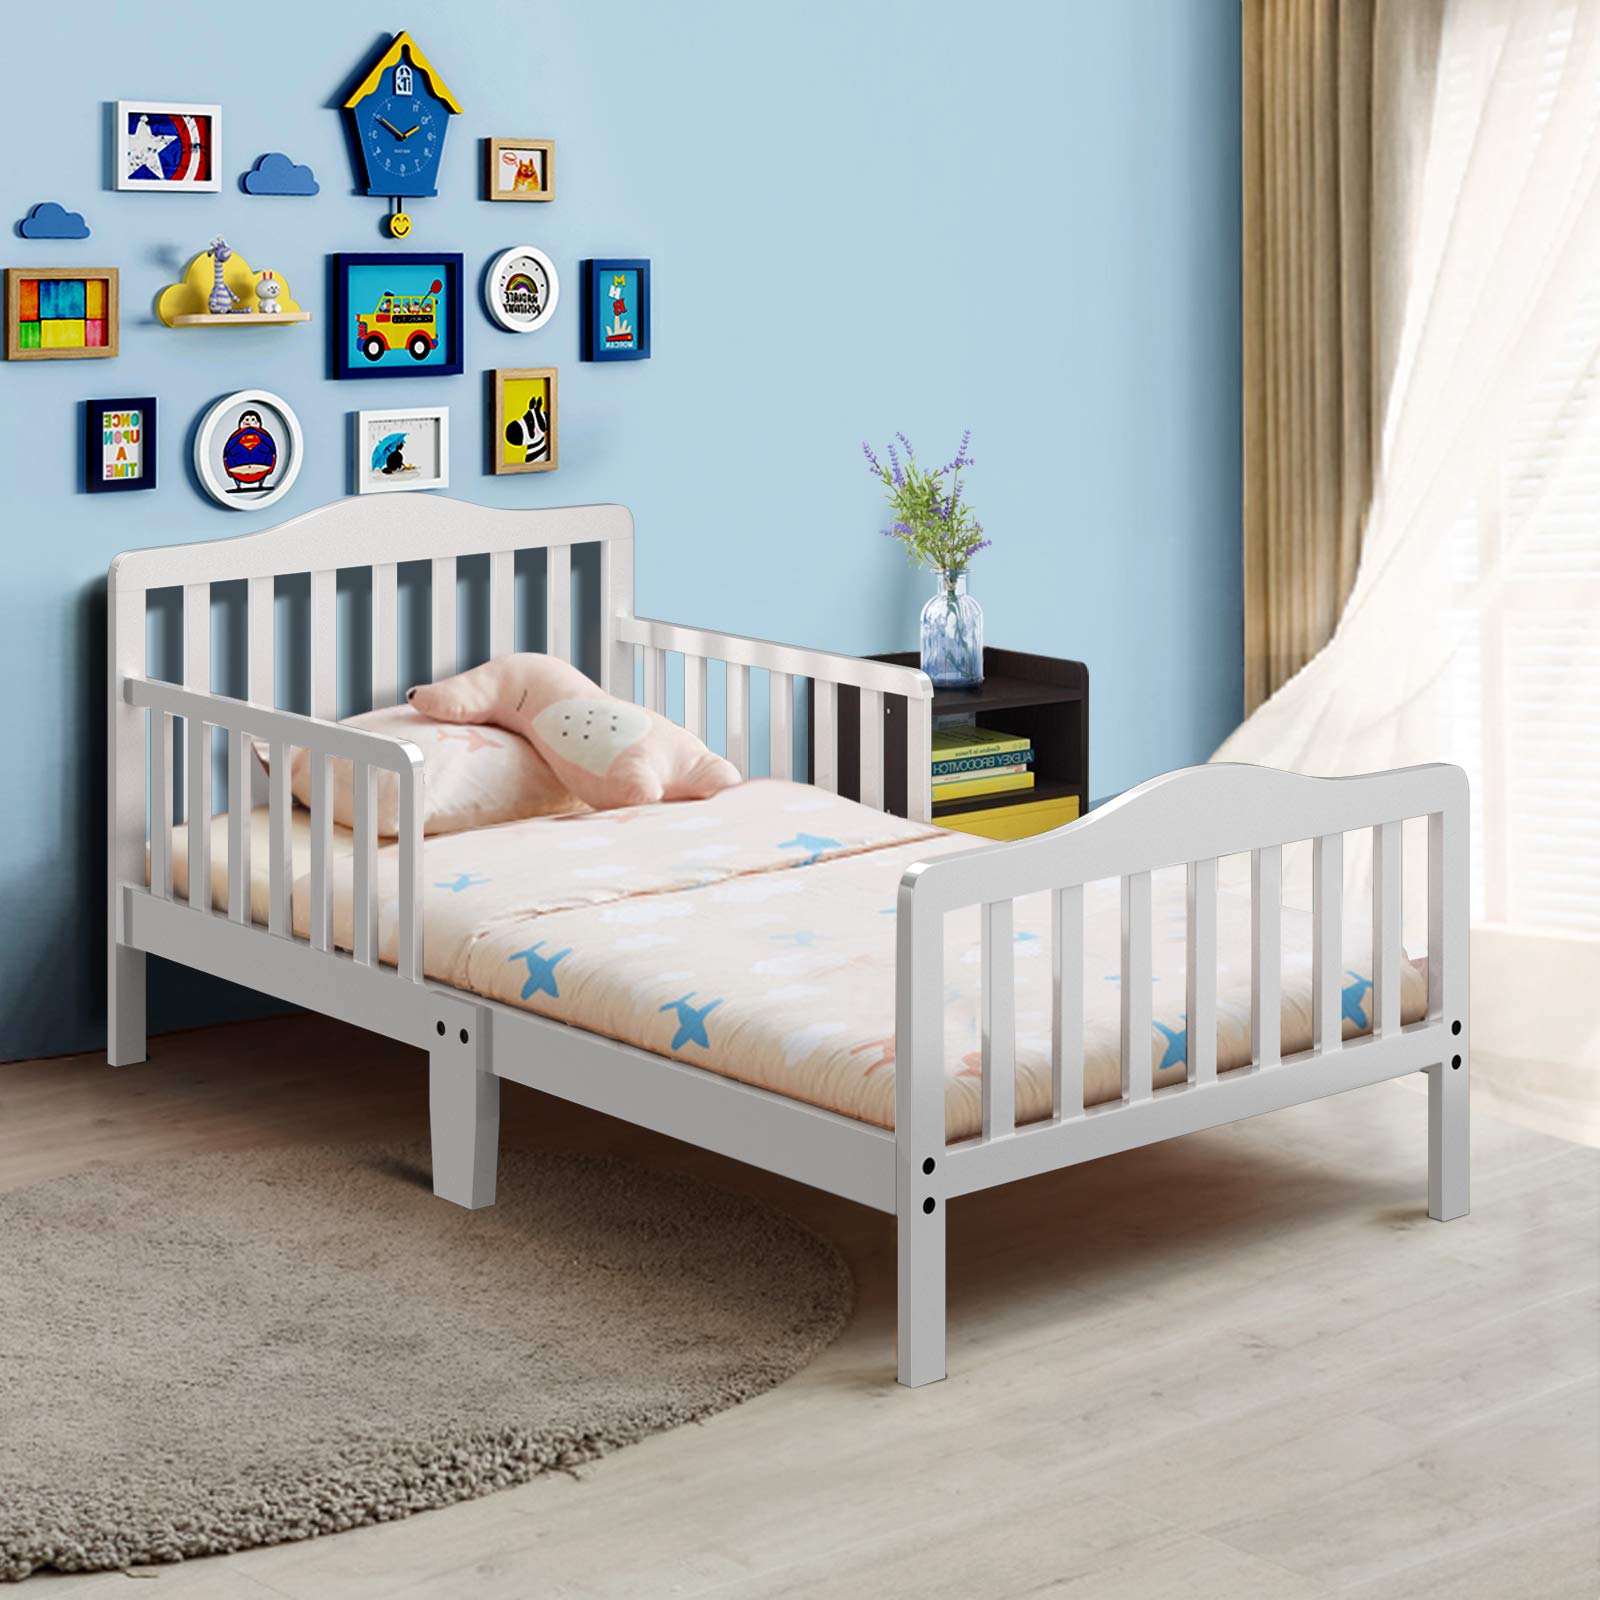 toddler bed size